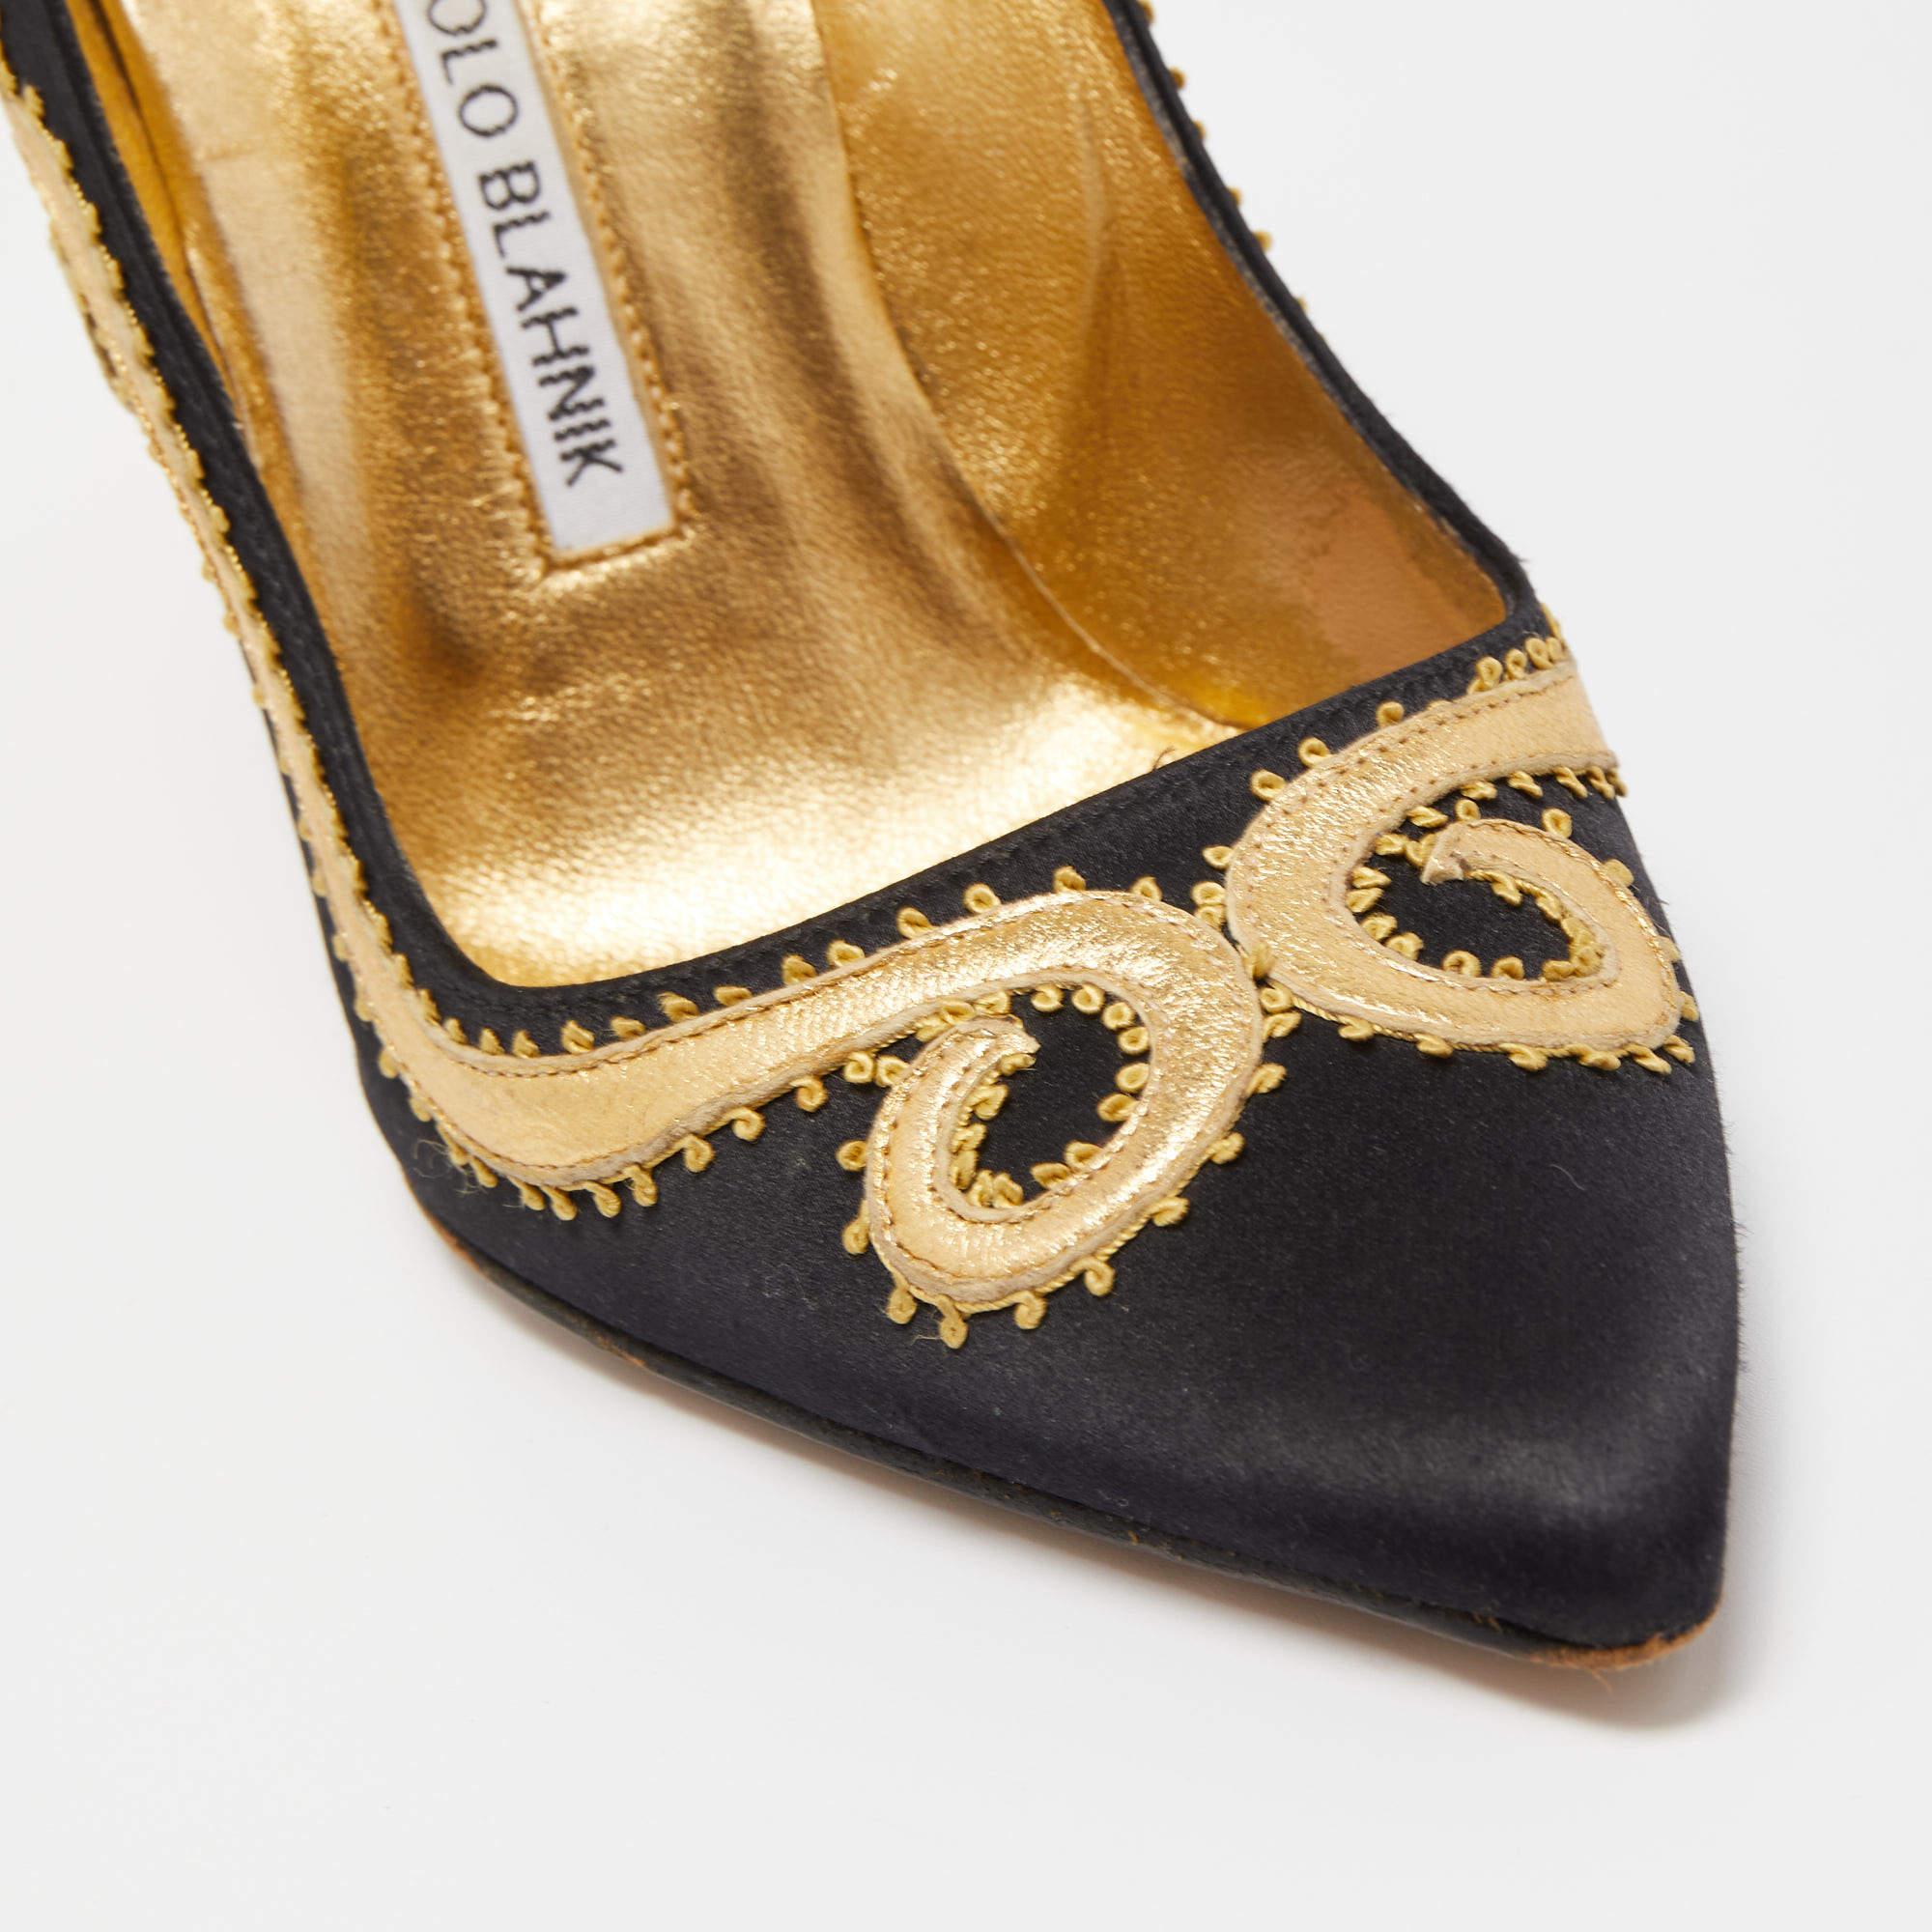 Manolo Blahnik Black/Gold Satin and Leather Embroidered Pumps Size 37 2